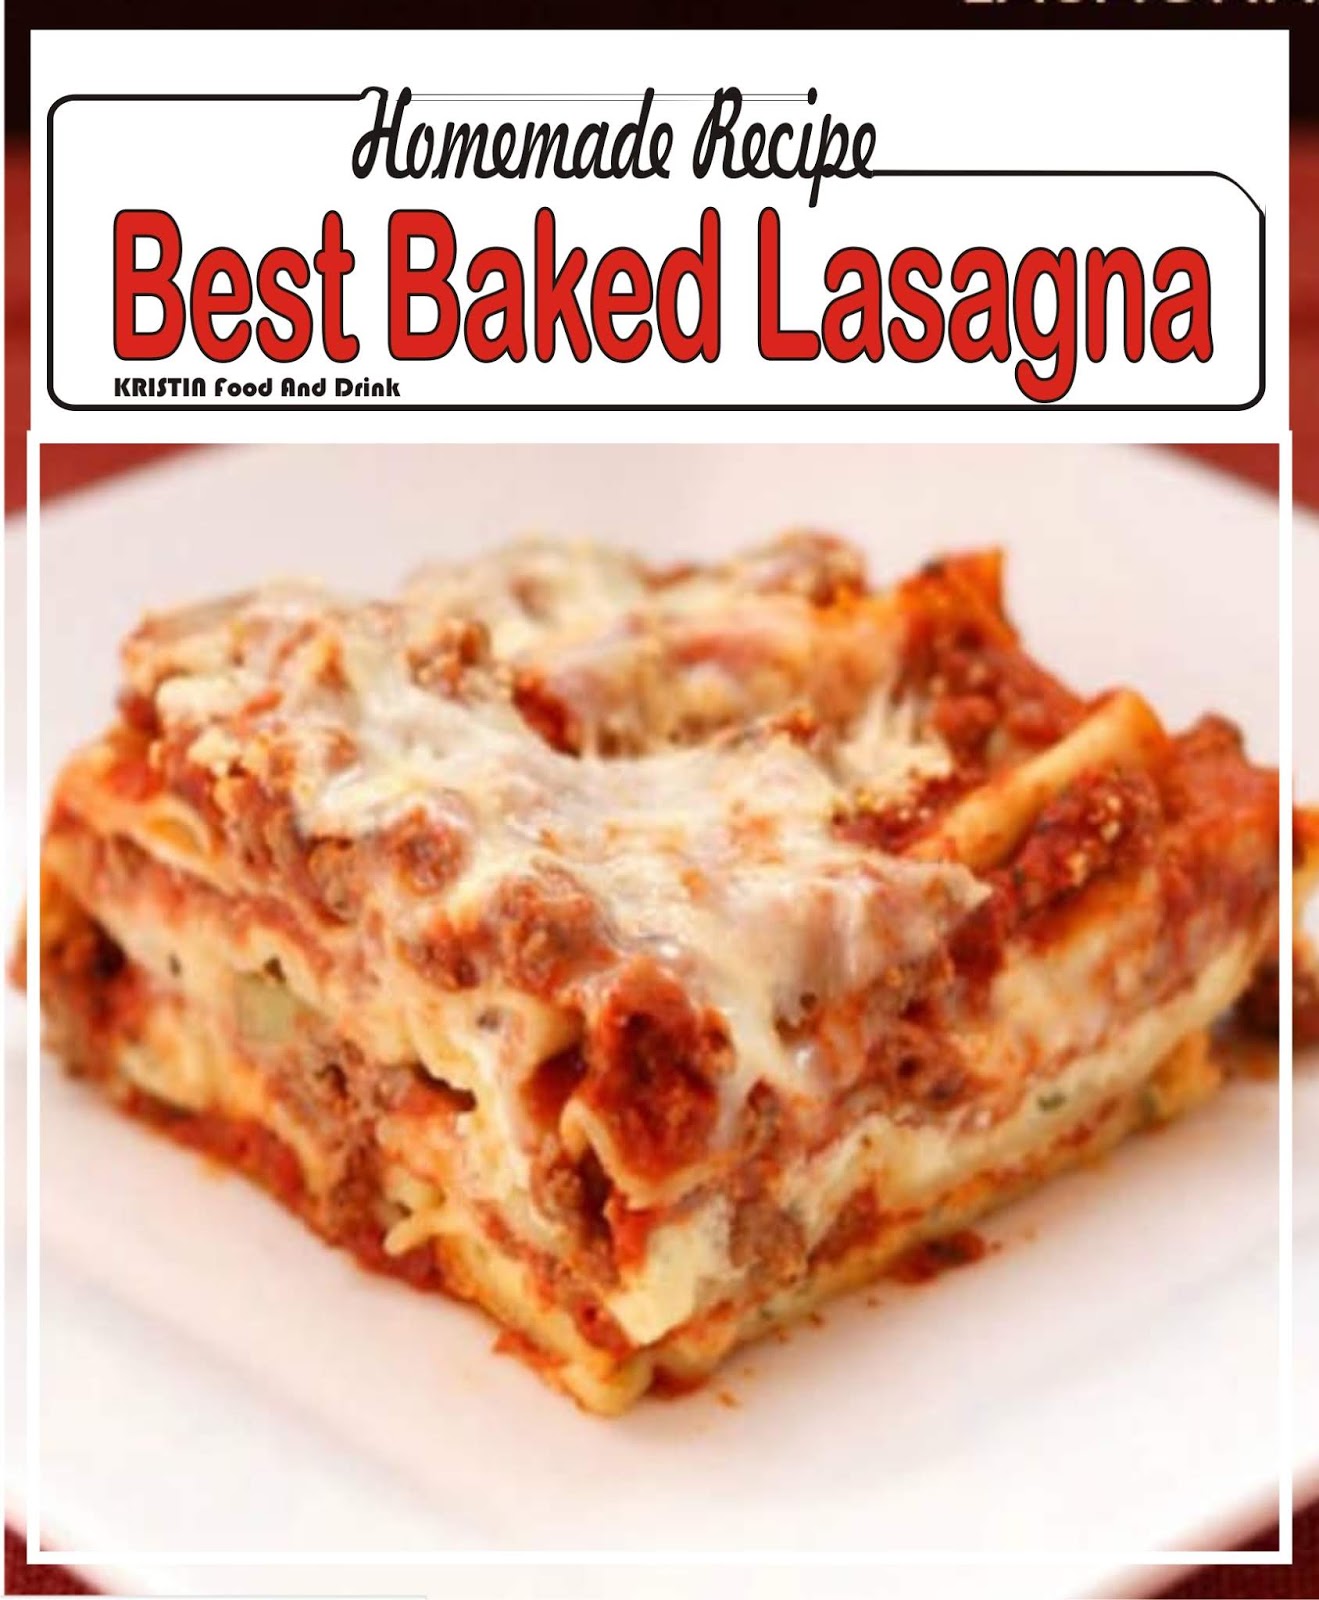 Best Baked Lasagna Homemade Recipe | KRISTIN food and drink